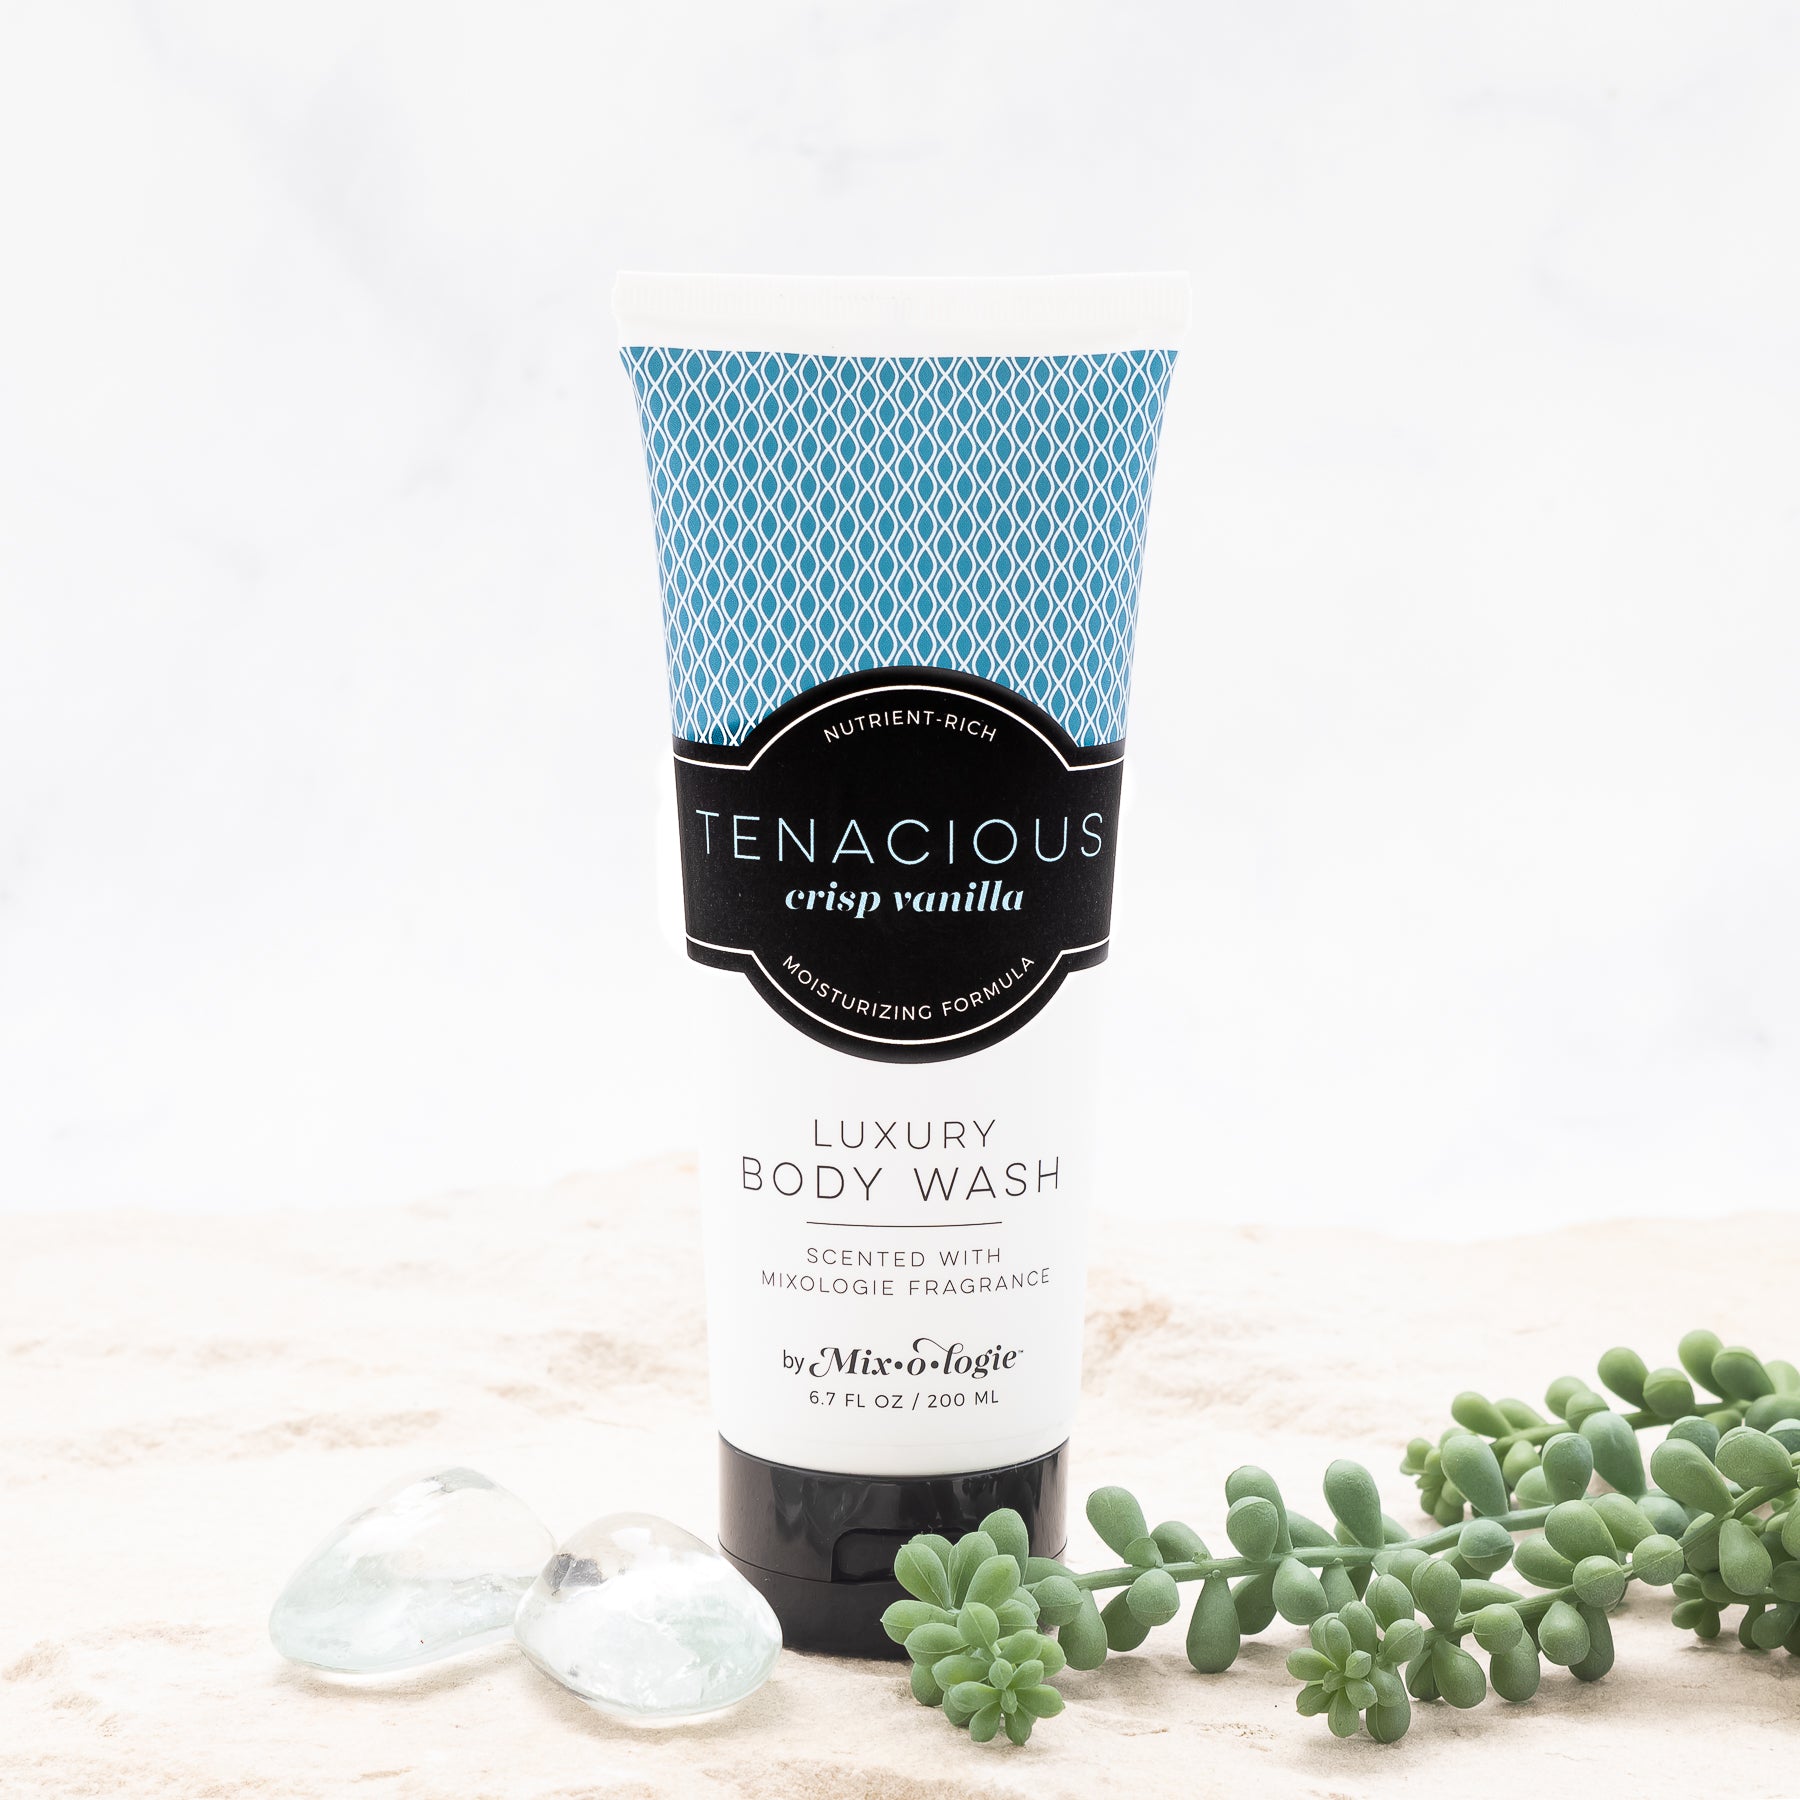 Luxury Body Wash in Mixologie’s Tenacious (Crisp Vanilla) in blue color sample package with black label. Contains 6.7 fl oz or 200 mL pictured in sand with rocks and greenery. 